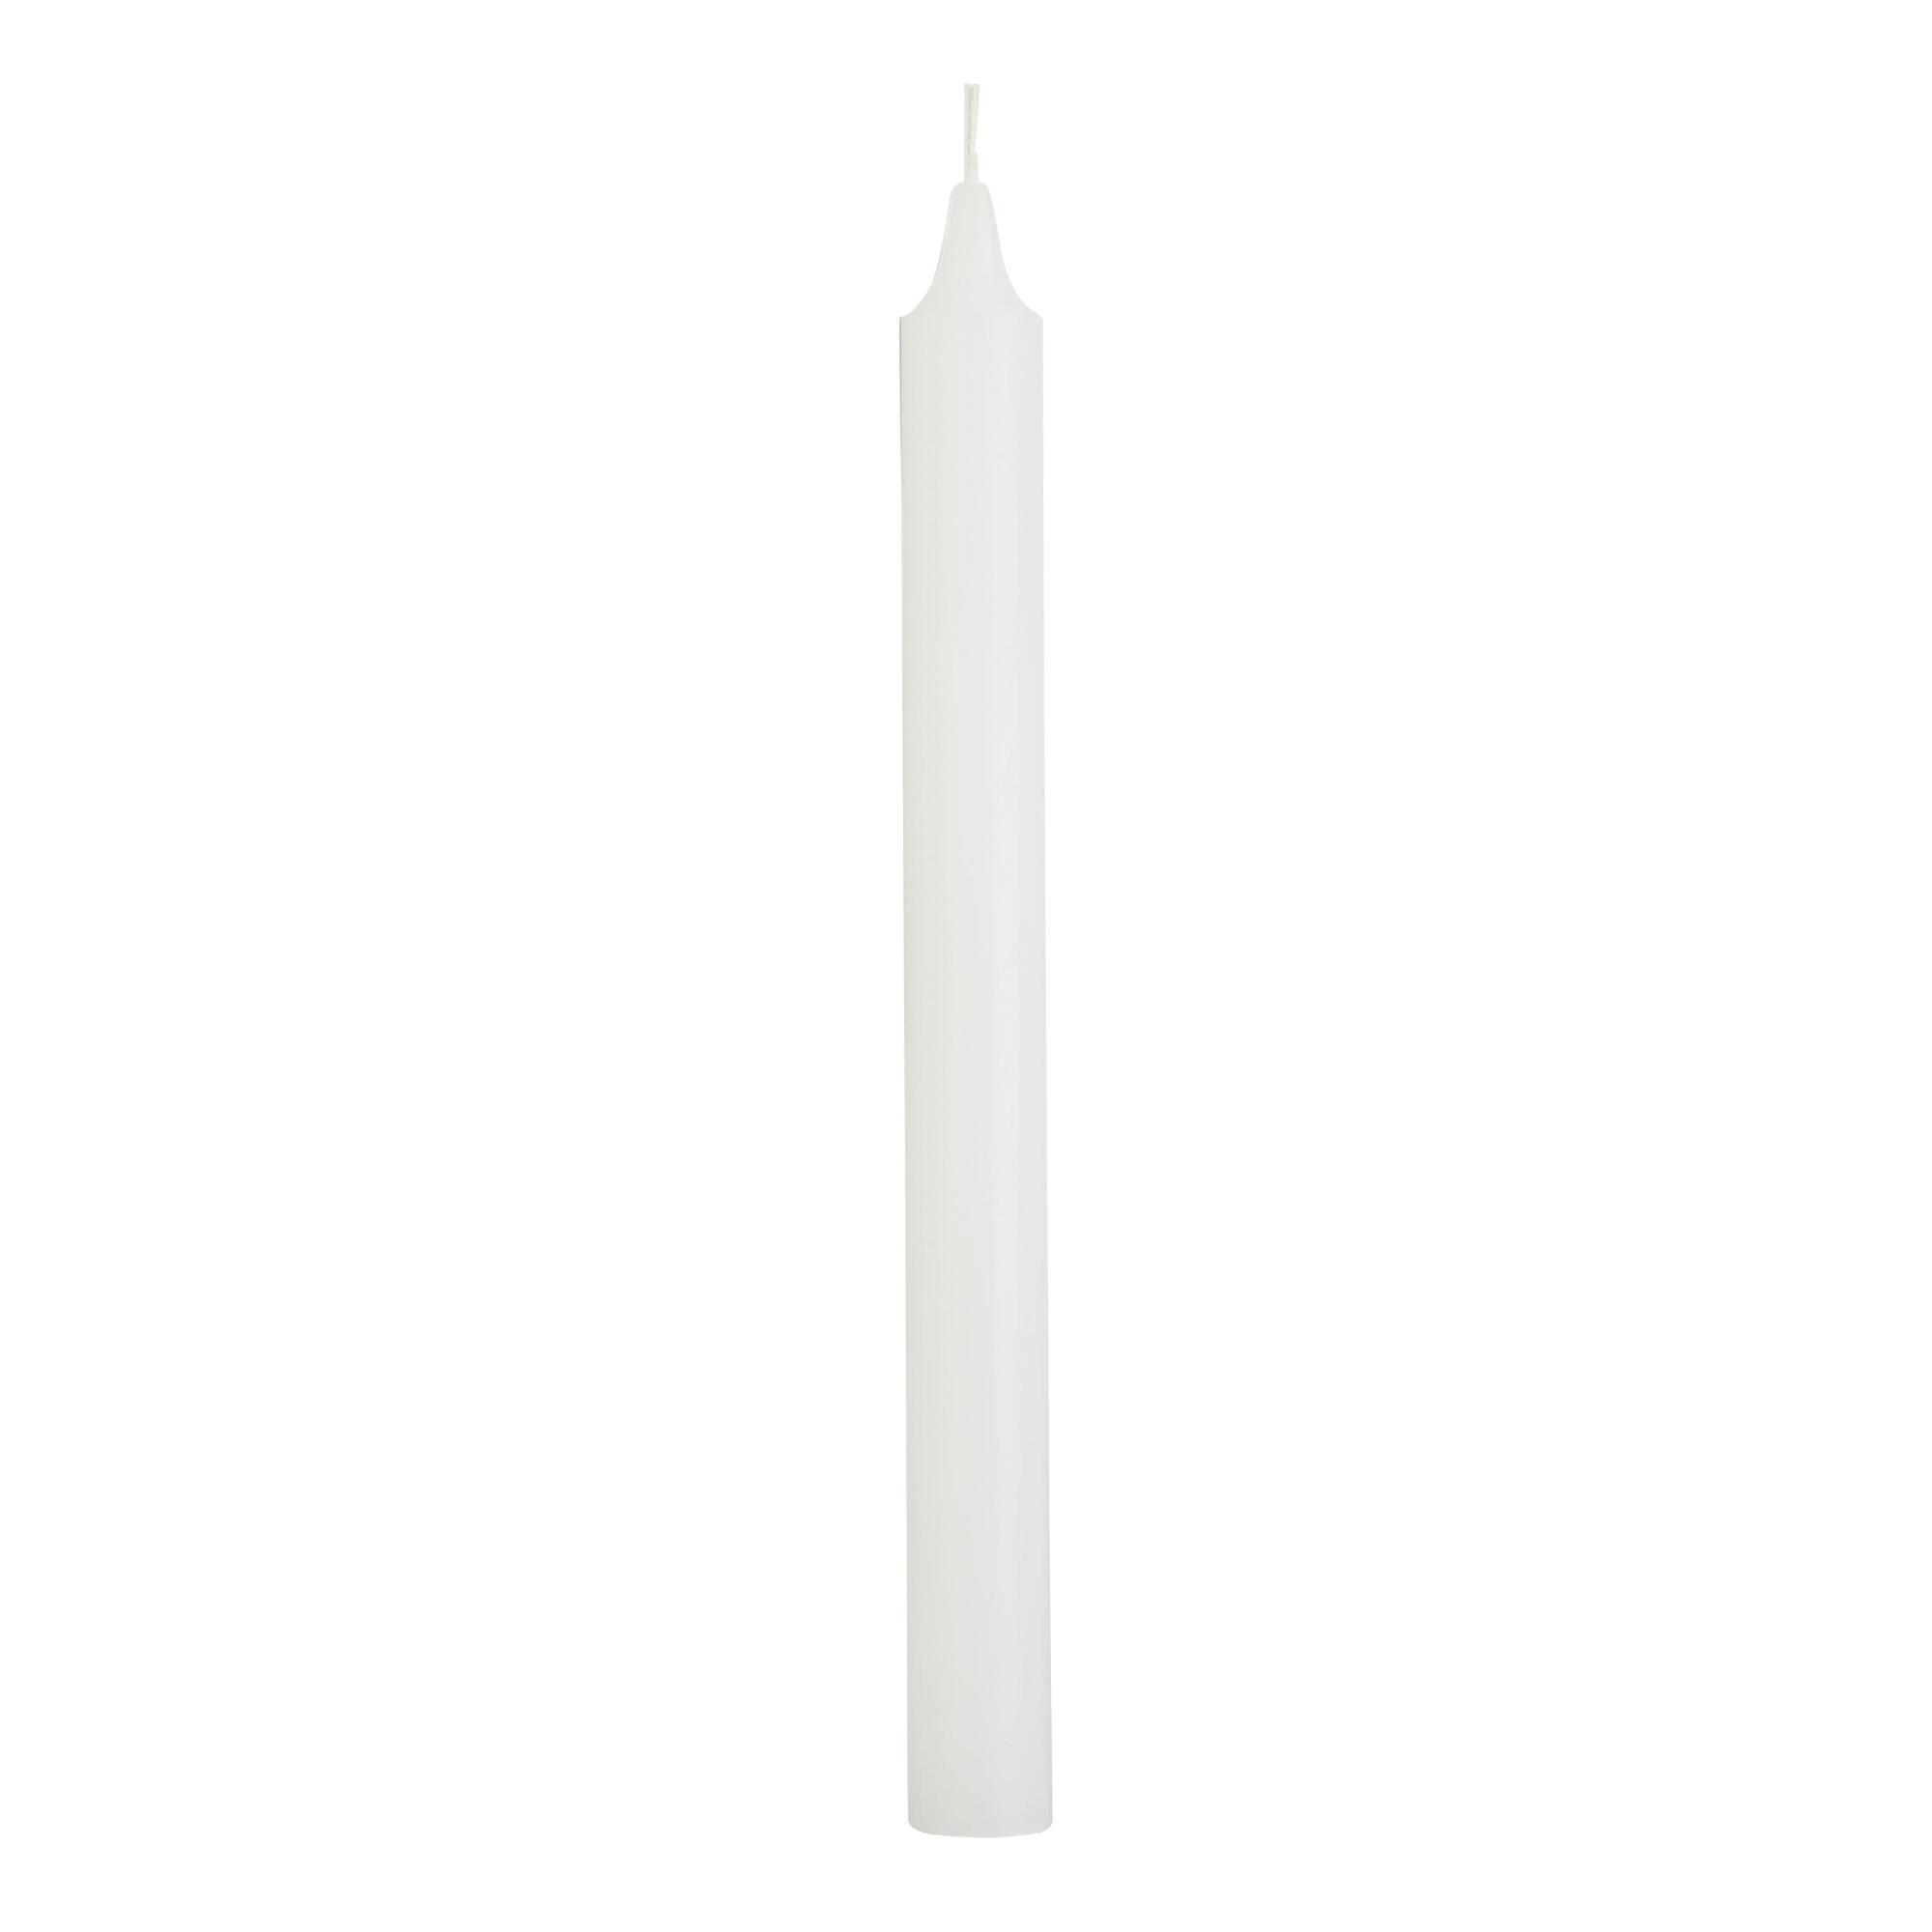 White Taper Candles 6 Pack - Wax by World Market